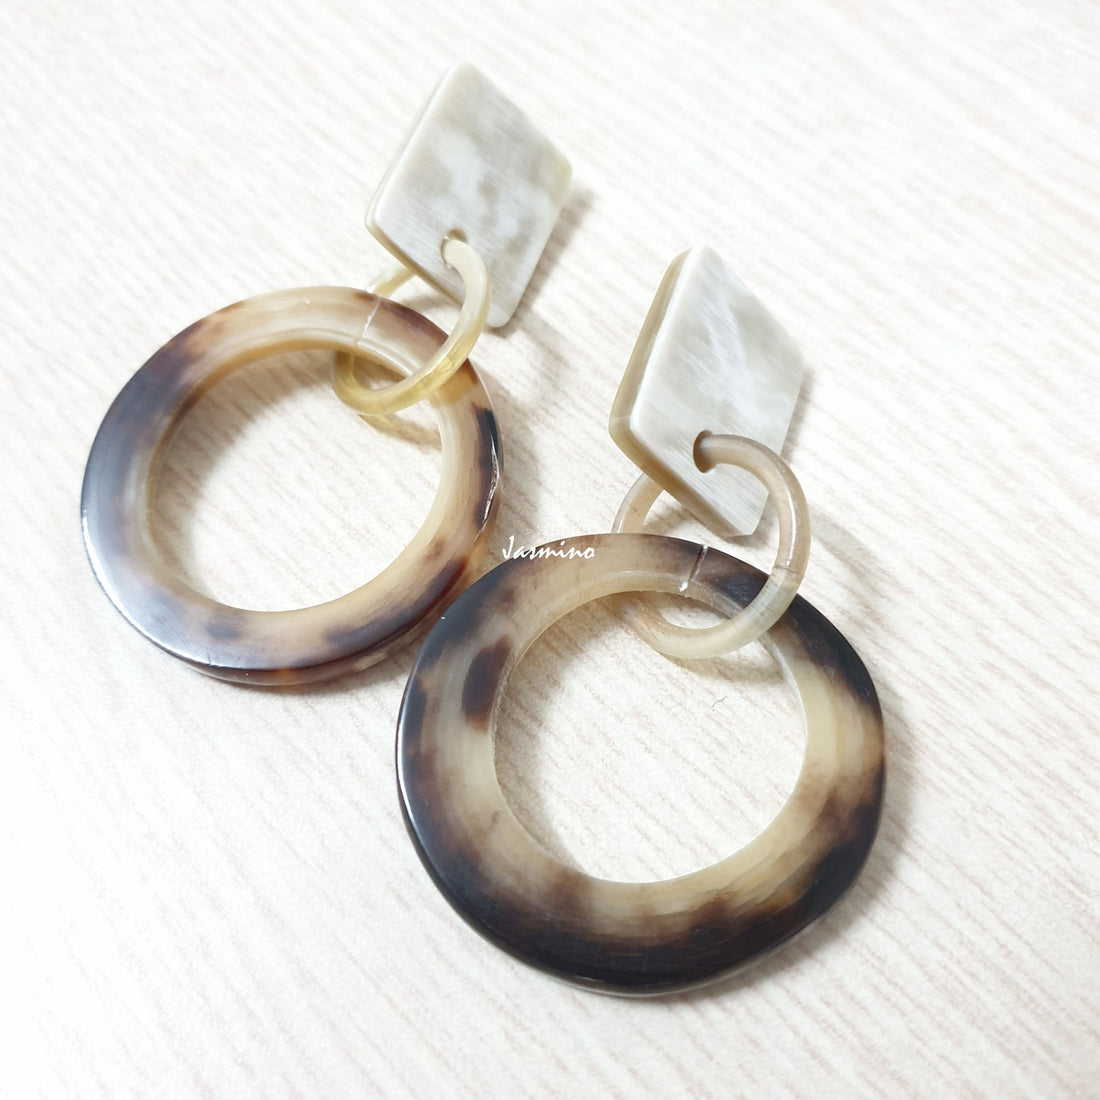 Handmade circular earrings feature leopard skin with brown and yellow in the natural light